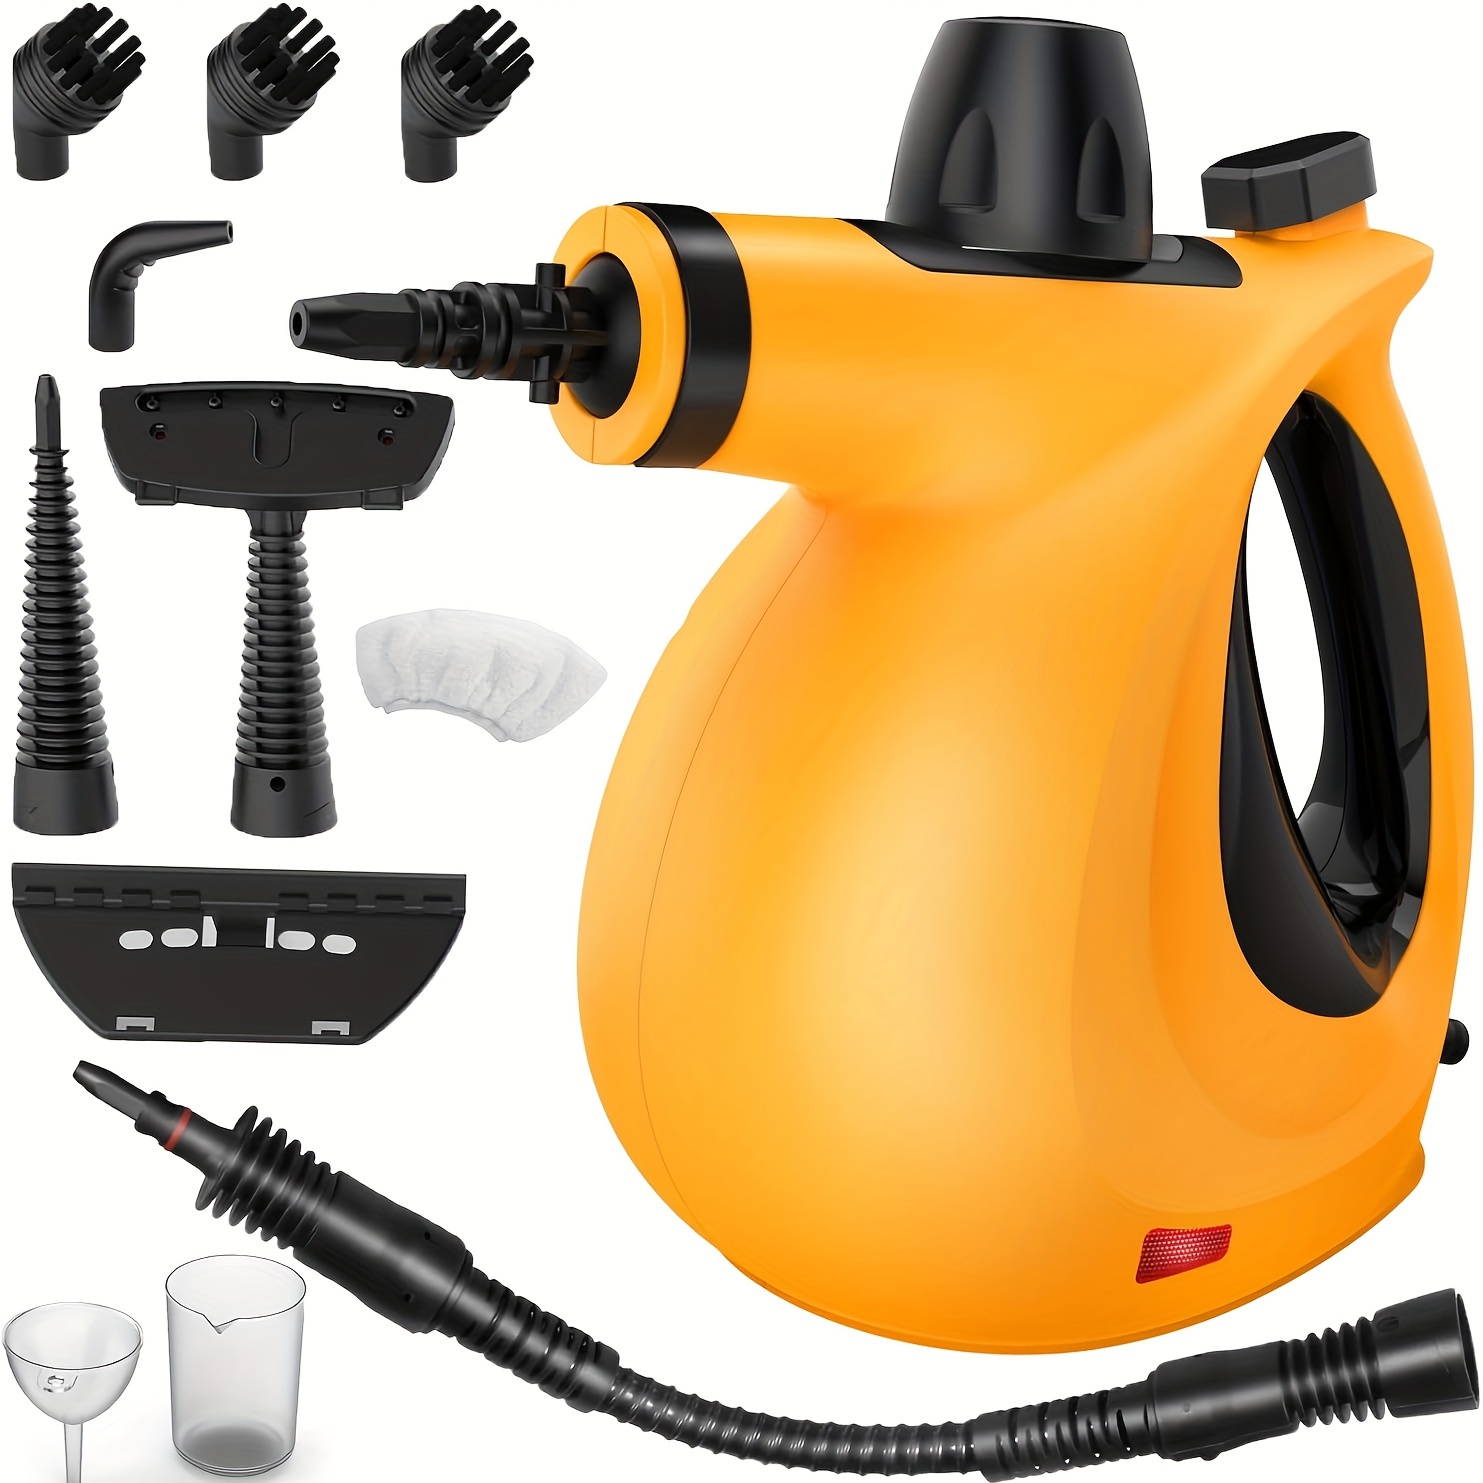 

Steam Cleaner, Pressurized Chemical-free Handheld Steam Cleaner For Home Use With 11pcs Multi-surface Tools, Multipurpose Steamer For Cleaning Home, Upholstery, Grout, Tile And Car Detailing